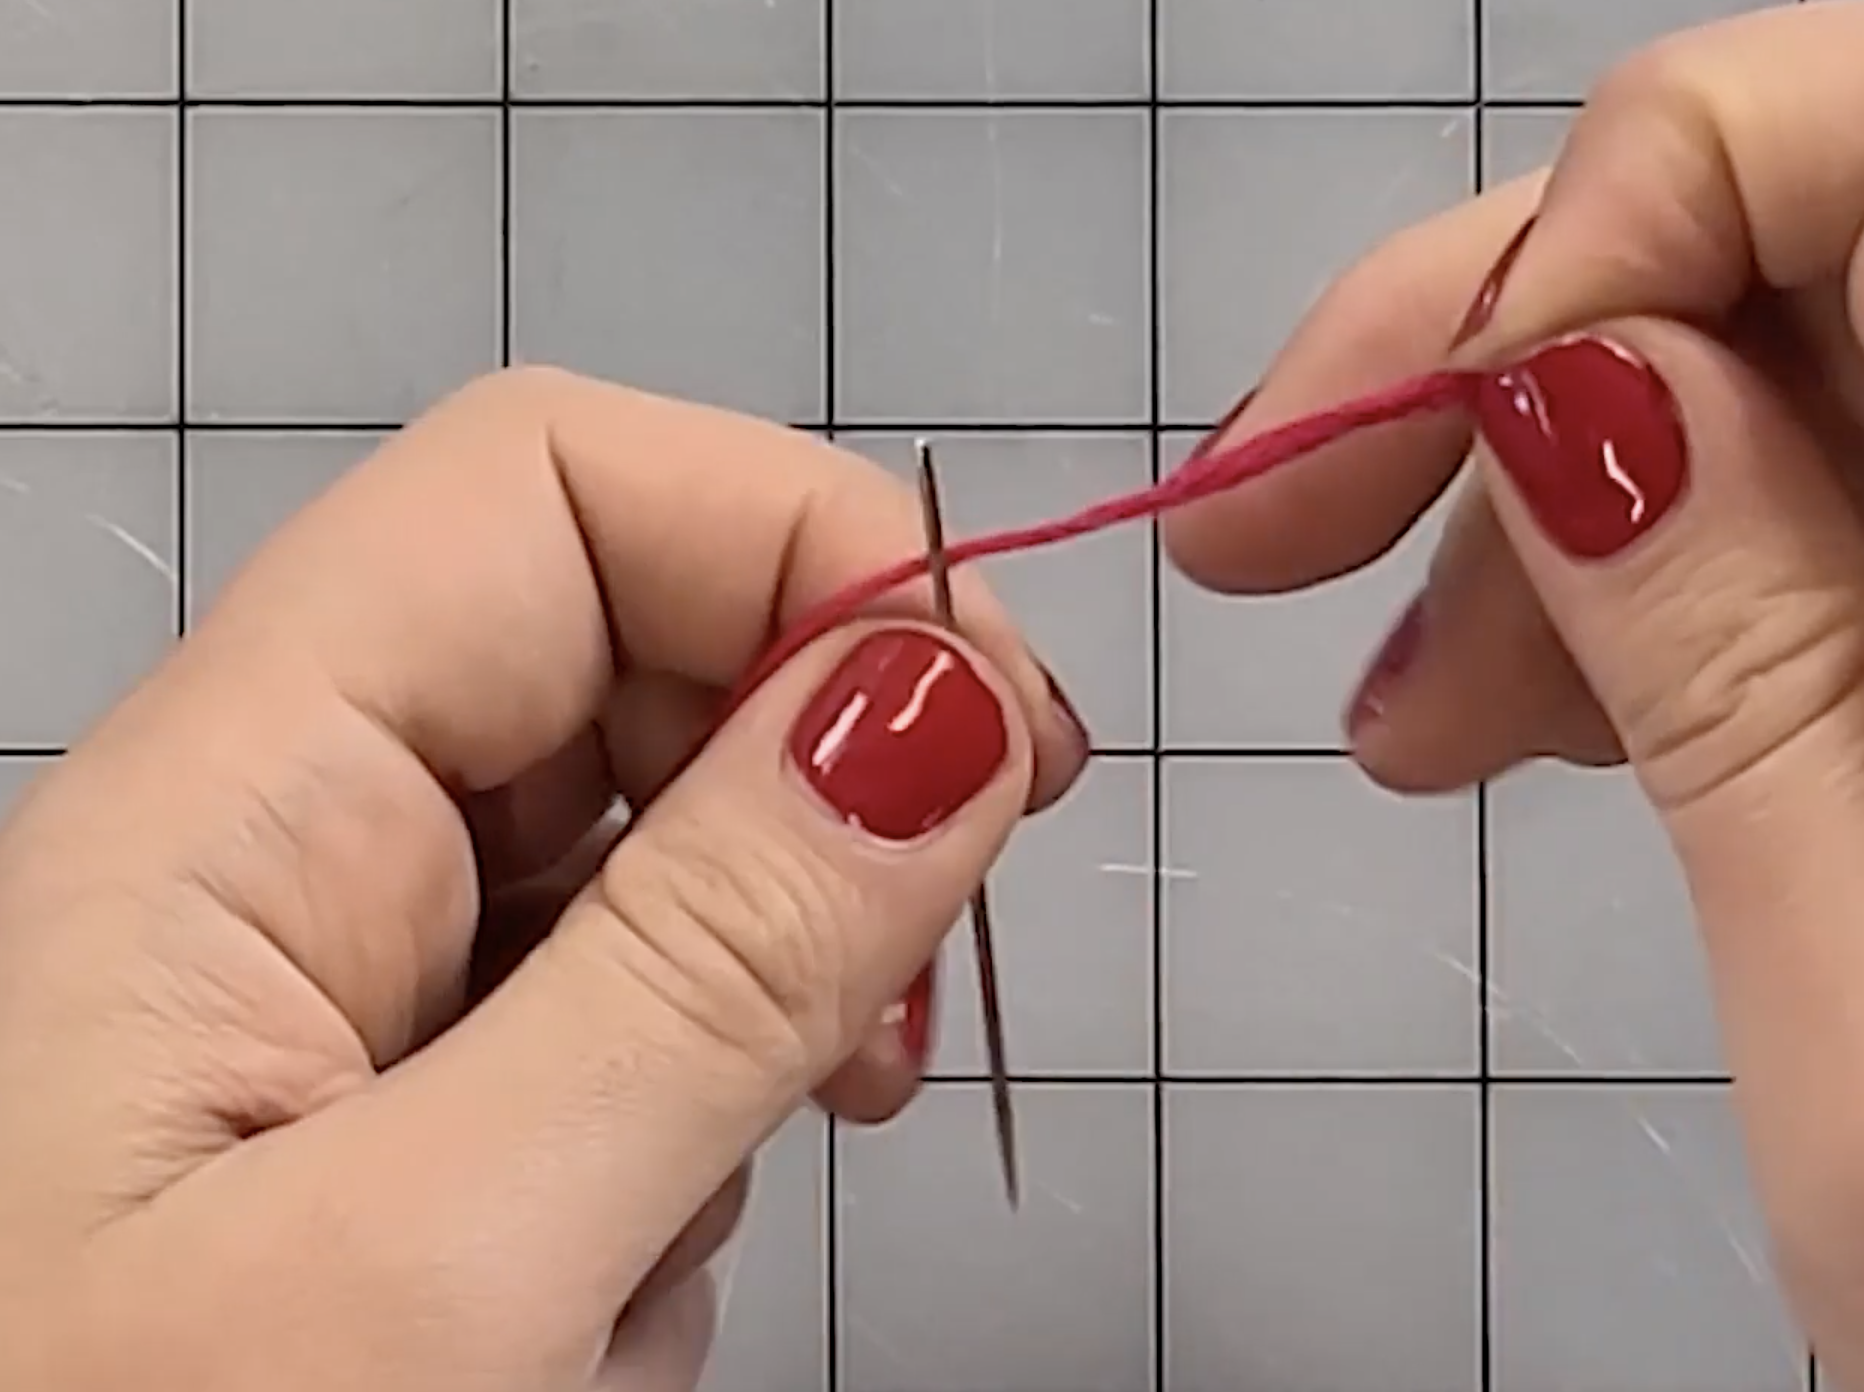 5 Needle Threading HACKS - How to thread a needle the EASIEST WAY 